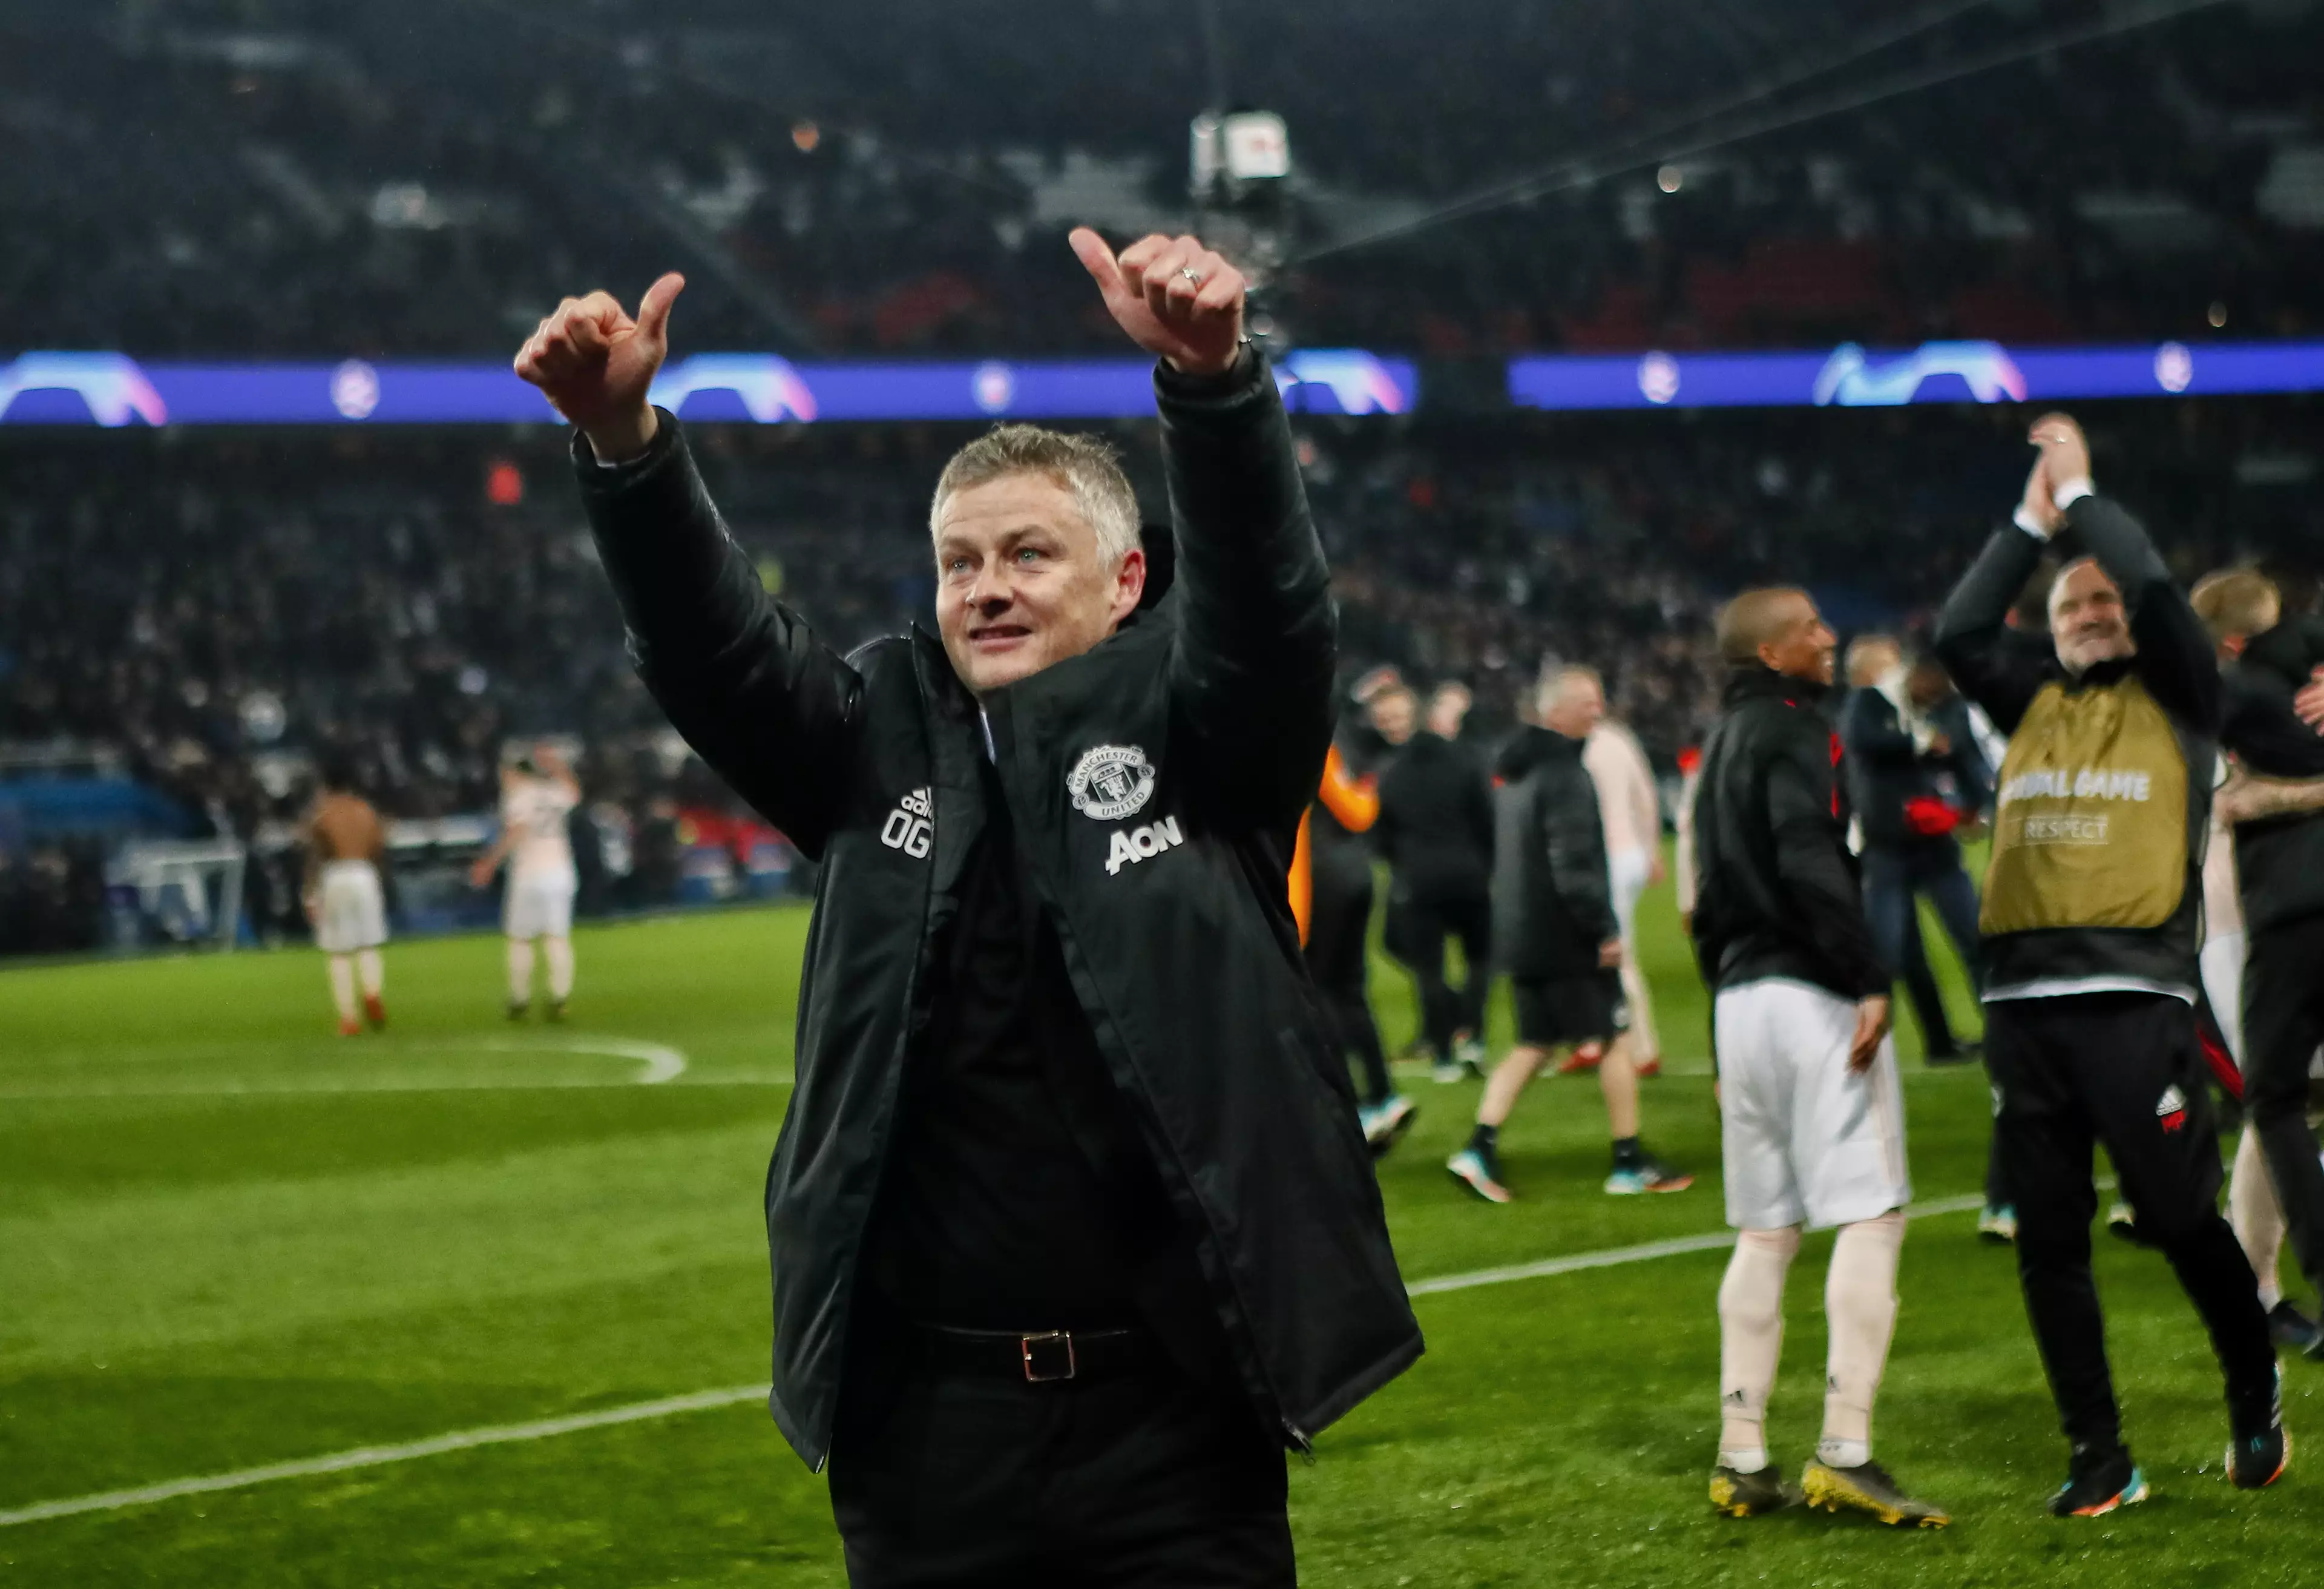 After Wednesday's win over PSG it seems unlikely Solskjaer won't be United boss next season. Image: PA Images